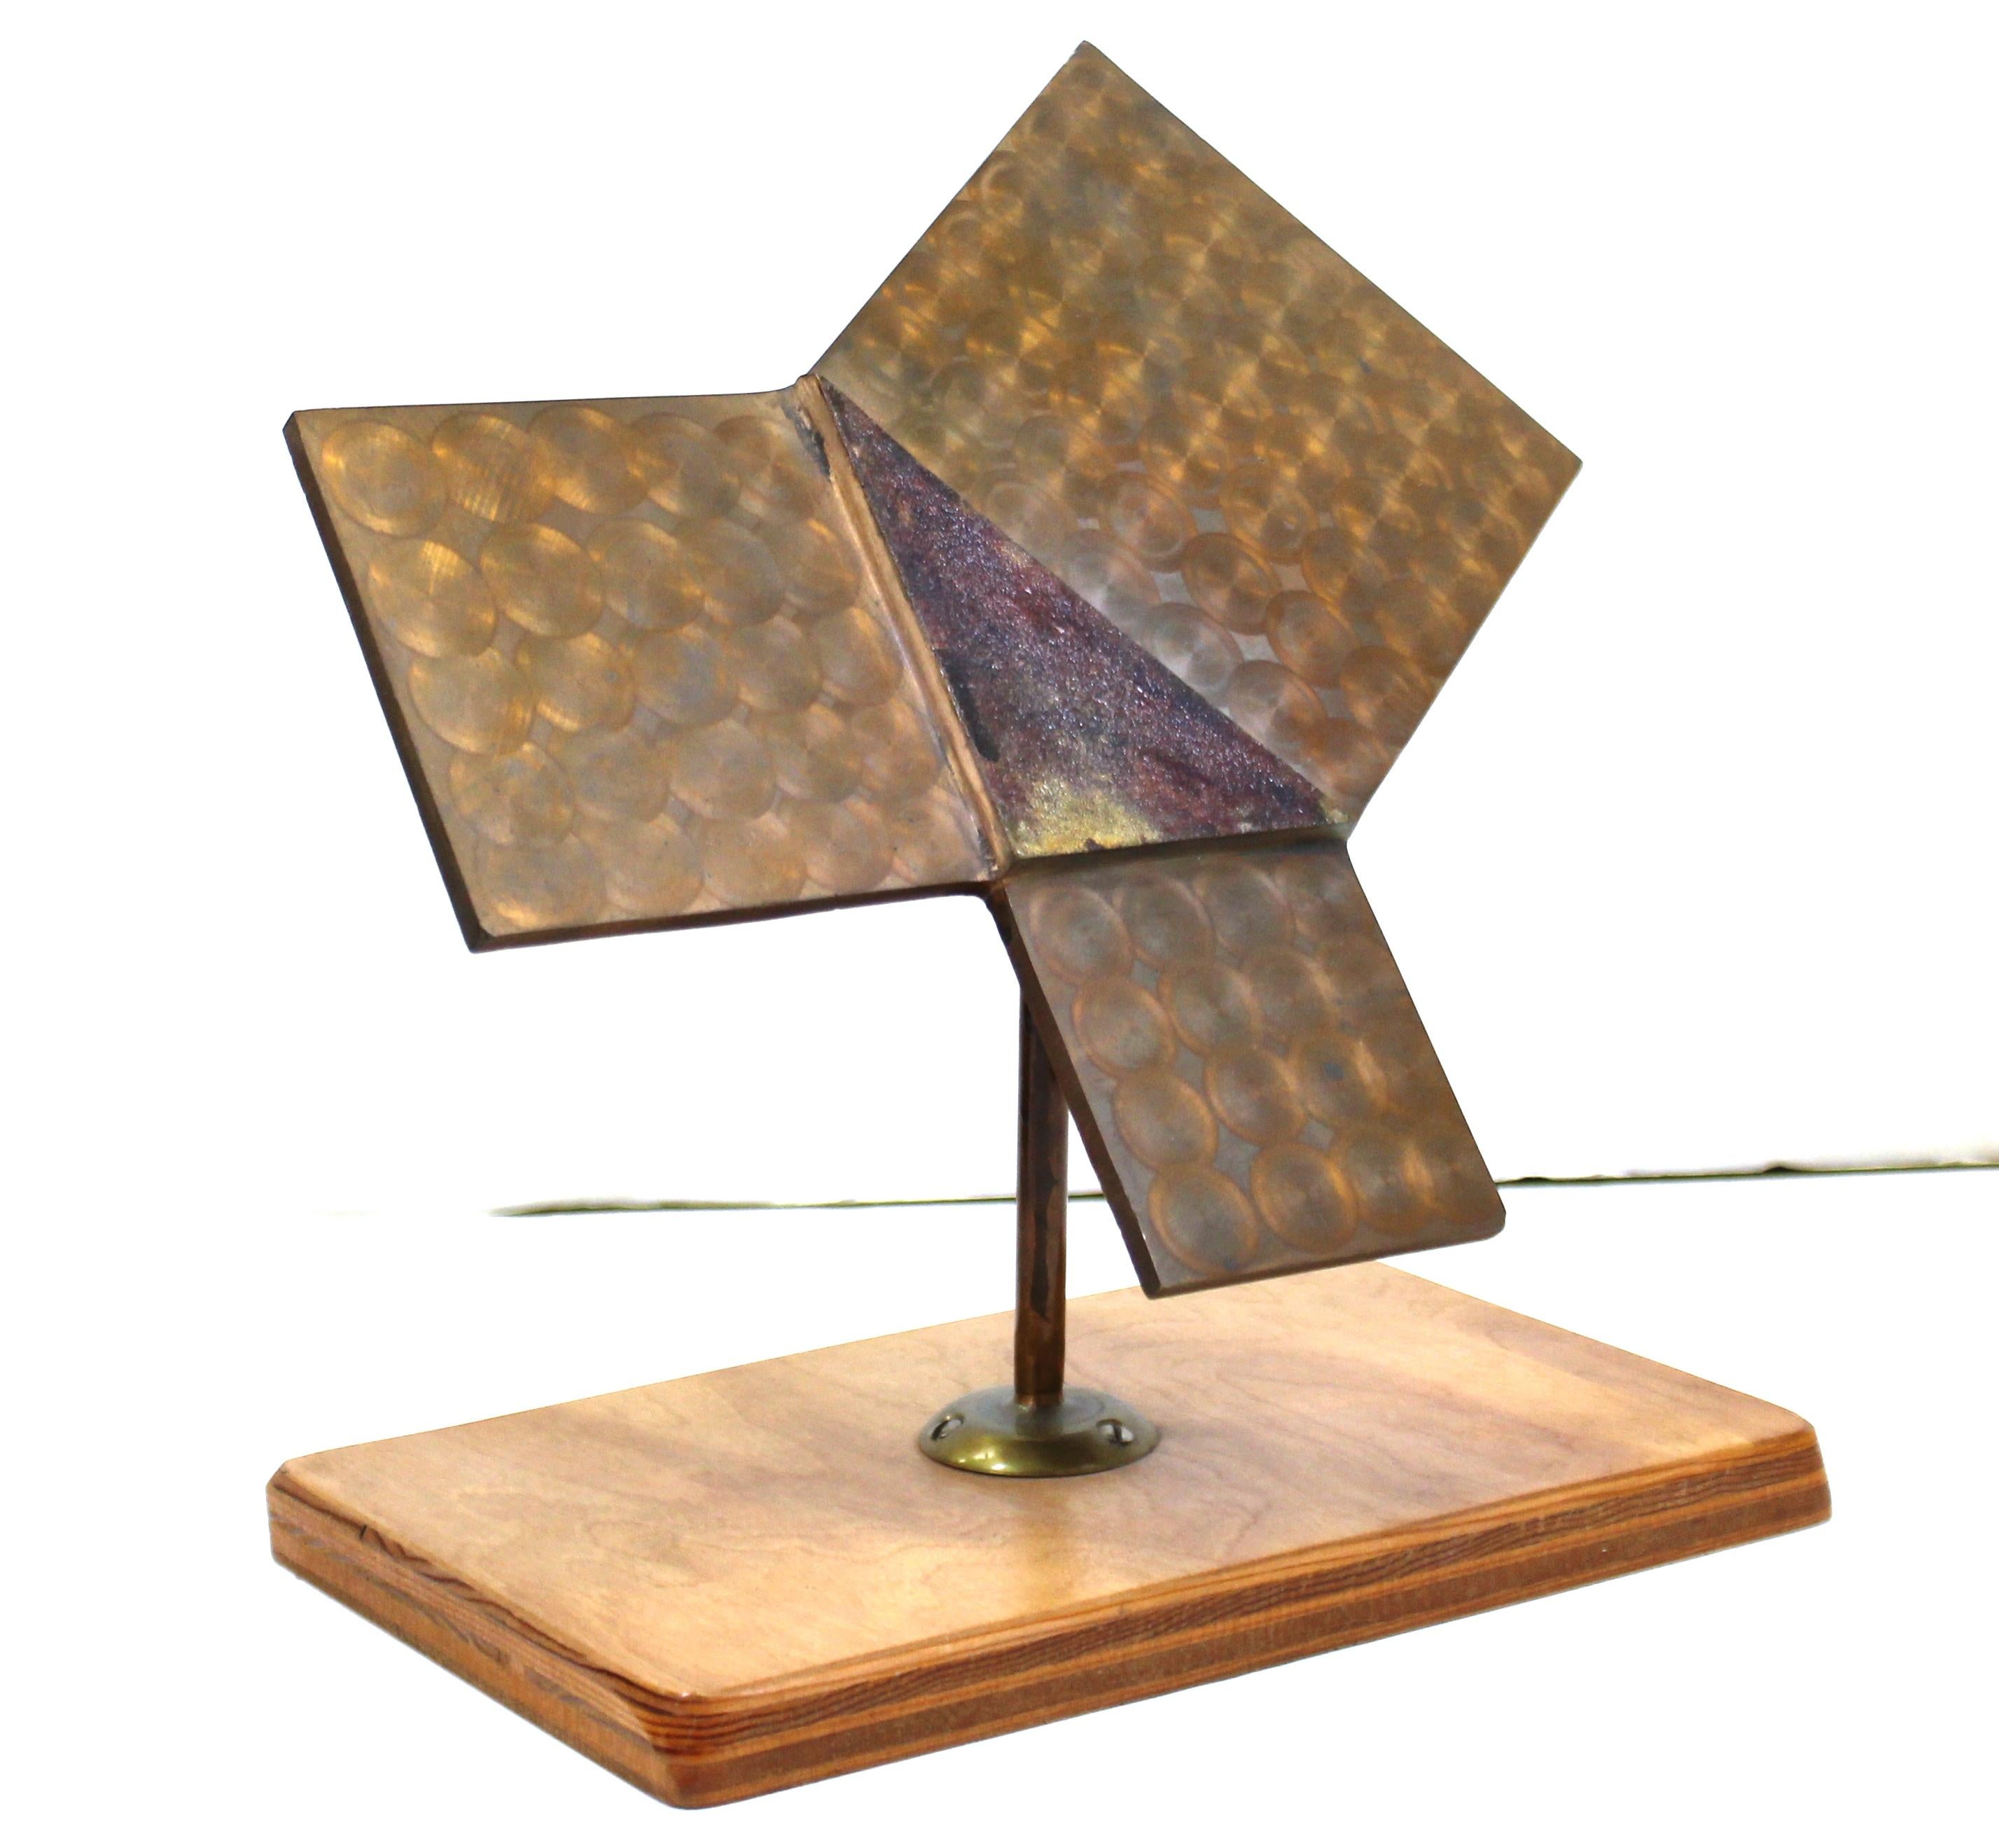 Modernist abstract welded metal sculpture of a geometric triangle, mounted on a wooden base. The piece has a label on the bottom form the art collection of 'Sigmund P. Morgen' and is in great vintage condition with age-appropriate wear and use.